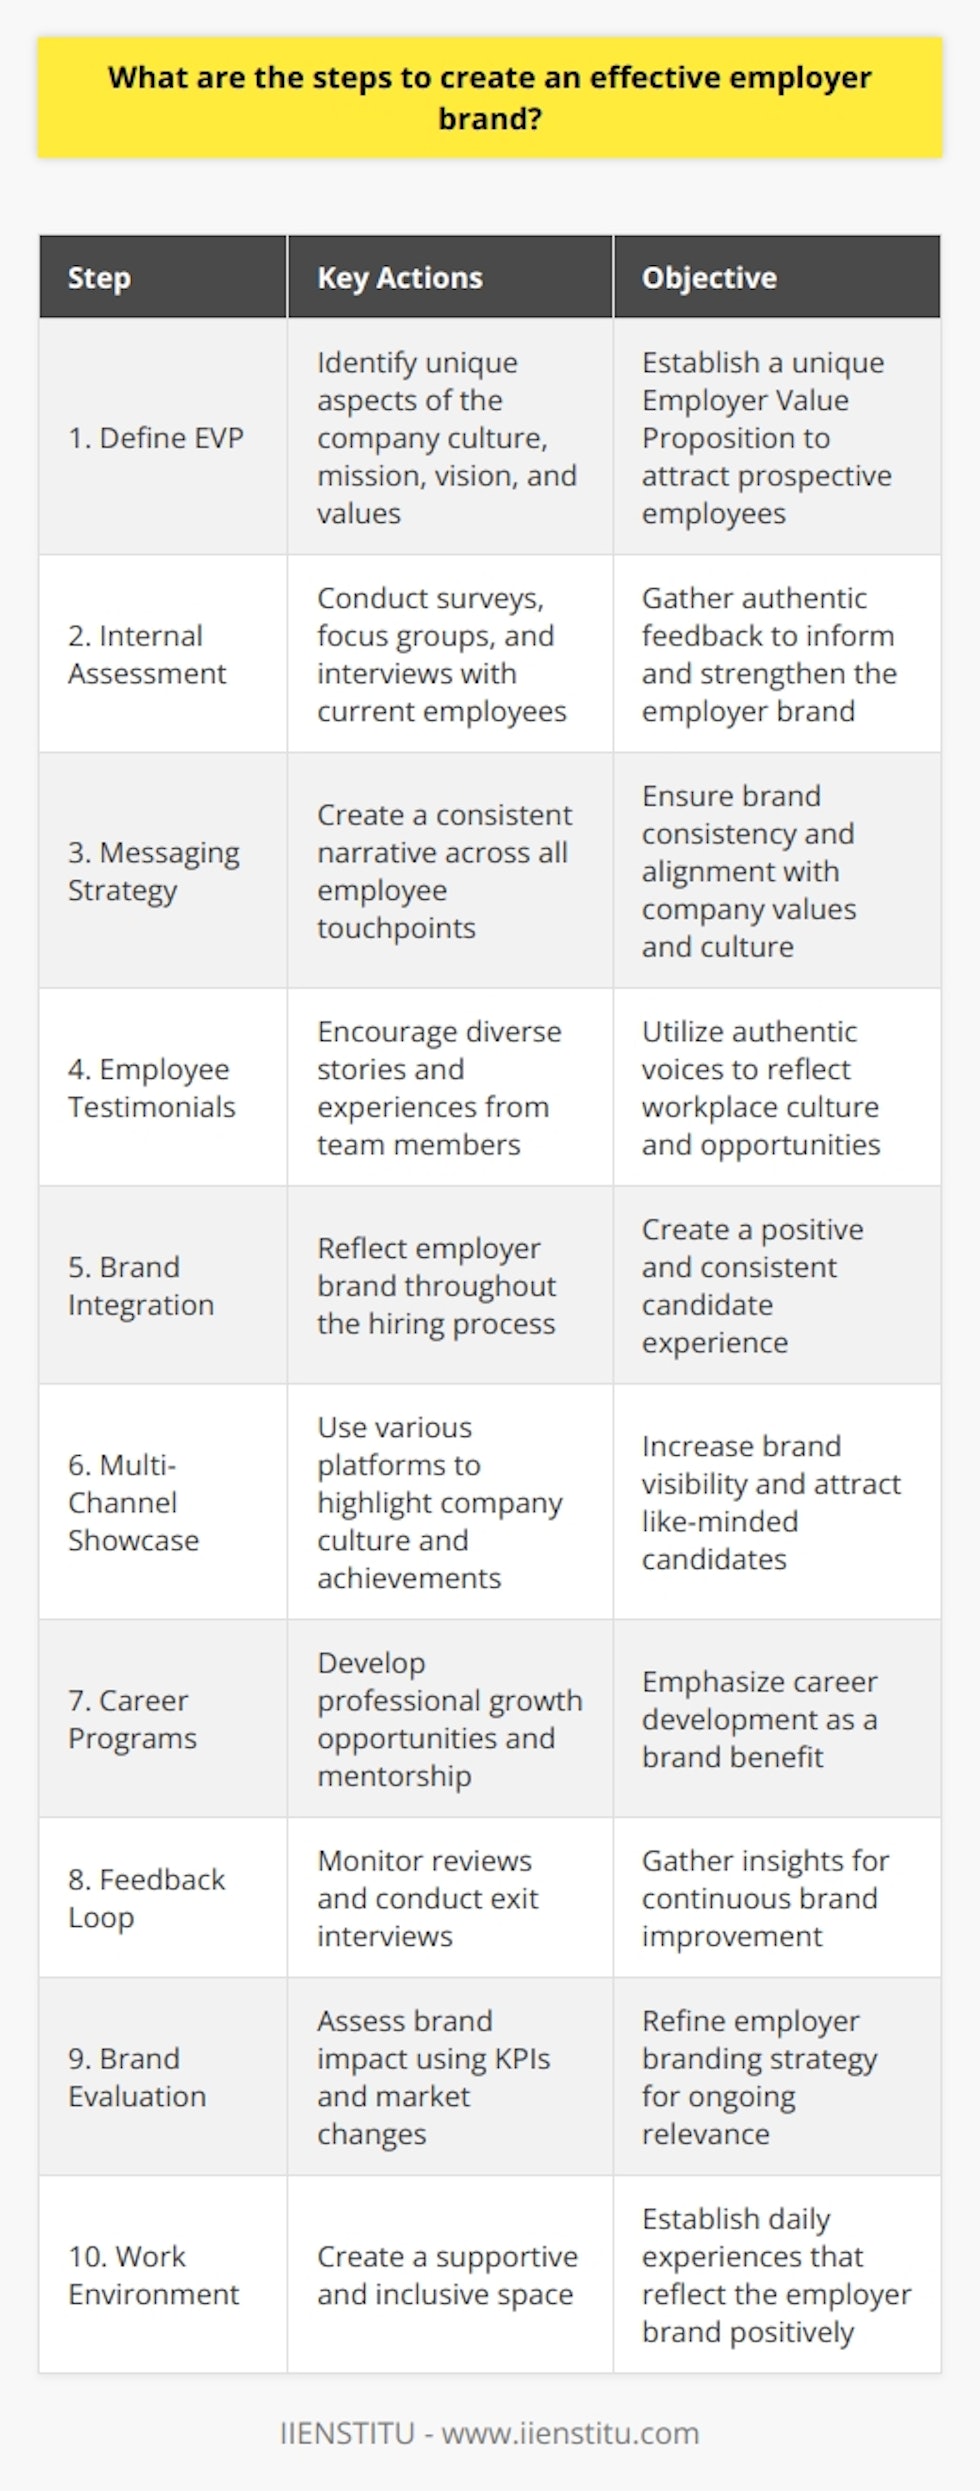 Creating an effective employer brand is an ongoing strategy that encompasses various aspects of a company's ethos, culture, and the way it presents itself in the hiring market. Here are key steps to create and maintain an effective employer brand:1. Define the Core Employer Value Proposition (EVP): Establish what makes your company unique as a place to work. Your EVP should be a blend of the mission, vision, values, and culture of your organization. It should resonate with the needs and desires of your prospective employees.2. Conduct an Internal Assessment: Gather feedback from current employees about what they value most about working for your company and areas they believe need improvement. This can be done through surveys, focus groups, or one-on-one interviews. Authentic employer branding starts from within, and employees are the most credible ambassadors of the brand.3. Develop a Consistent Messaging Strategy: Consistency is critical. Craft a narrative that aligns with your EVP and communicates your company’s culture, goals, and advantages as an employer. Use this messaging across all platforms and touchpoints with potential and current employees.4. Leverage Employee Testimonials: Encourage your employees to share their stories and experiences. Positive testimonials from diverse team members can powerfully reflect your workplace culture and the opportunities you offer.5. Integrate Branding into the Hiring Process: From job descriptions to interview processes, ensure that every candidate's experience reflects your employer brand. The application process should be seamless; interviews should be respectful and engaging, and communication should be thoughtful and timely.6. Showcase Your Brand Across Multiple Channels: Use social media, your company website, and other online platforms to showcase your work environment, employee success stories, corporate social responsibility efforts, and any awards or recognitions. IIENSTITU, for example, might share insights on their pedagogical approach and corporate culture to attract like-minded educators and staff.7. Create Engaging Career Development Programs: A promising career path is a powerful element of an employer brand. Provide clear avenues for professional growth, development programs, mentorship, and training opportunities.8. Monitor and Act on Feedback: Regularly review online reviews on employment platforms, conduct exit interviews, and track employee engagement metrics. This information will provide actionable insights to improve your employer branding strategy.9. Evaluate and Refine Your Employer Brand: Regularly assess the effectiveness of your branding efforts through key performance indicators such as time-to-hire, retention rates, employee engagement scores, and hiring source effectiveness. Be prepared to make adjustments based on data and changing company or market dynamics.10. Foster a Positive Work Environment: Ultimately, your employer brand is a reflection of the daily experiences of your employees. Create a workspace that promotes well-being, flexibility, inclusion, and recognition.An effective employer brand is not just about attracting new talent; it is also about retaining the talent you have. It requires authenticity, consistency, and a willingness to adapt and evolve with your workforce's changing needs. With a thoughtful approach, any company, including IIENSTITU, can build an employer brand that resonates deeply with current and future employees, fostering a dedicated and motivated workforce.